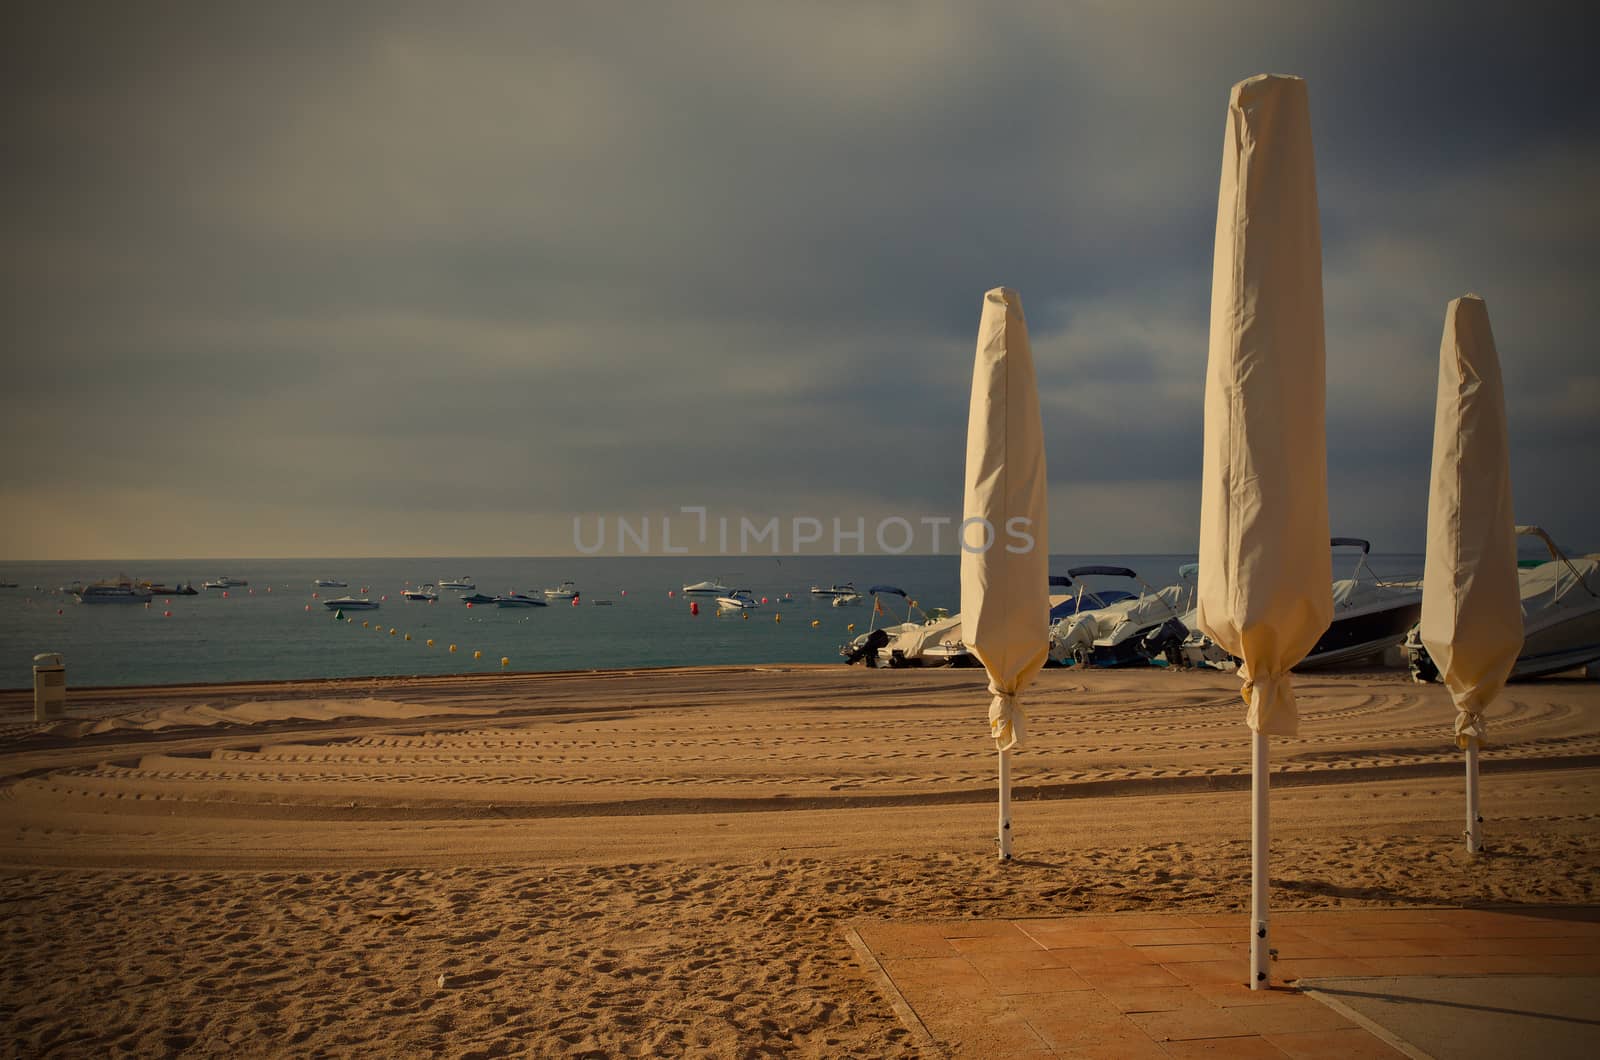 Early morning on the Mediterranean beach, instagram image style